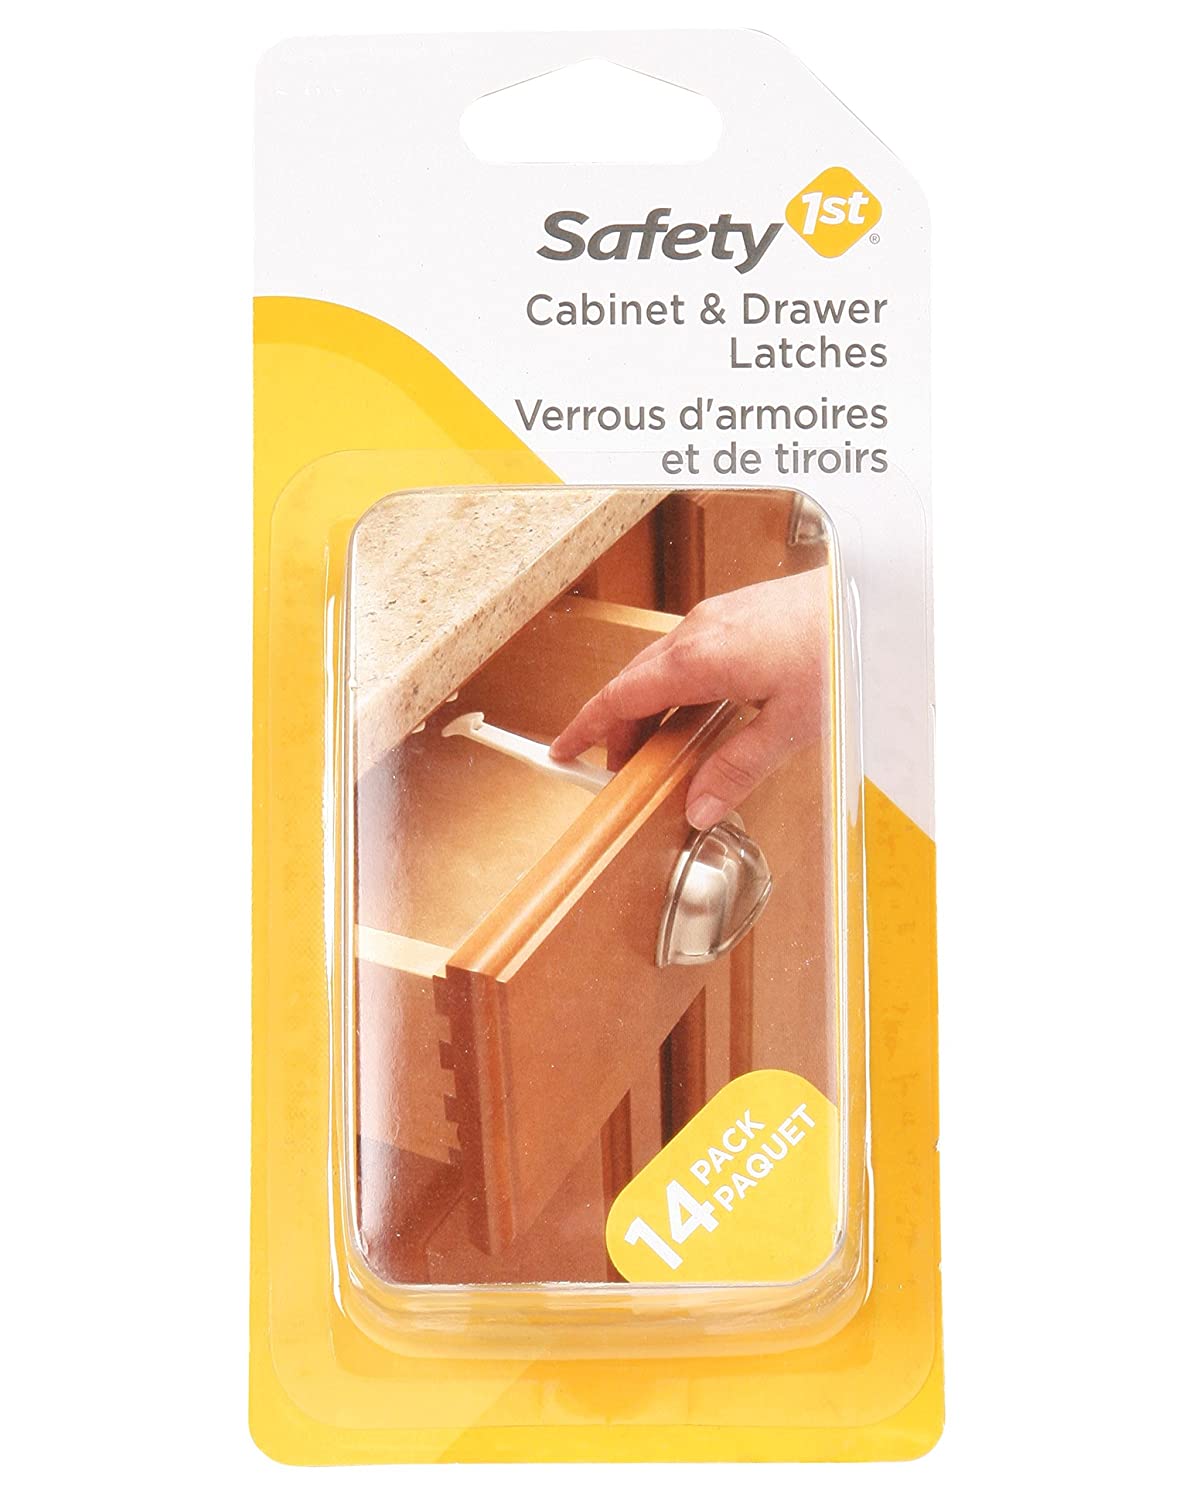 Helps keep cabinets off limits to little ones
The easy wide grip surface provides quick access for parents and they are simple to install
Includes 14 latches
This item comes with screws and not a Stick on.